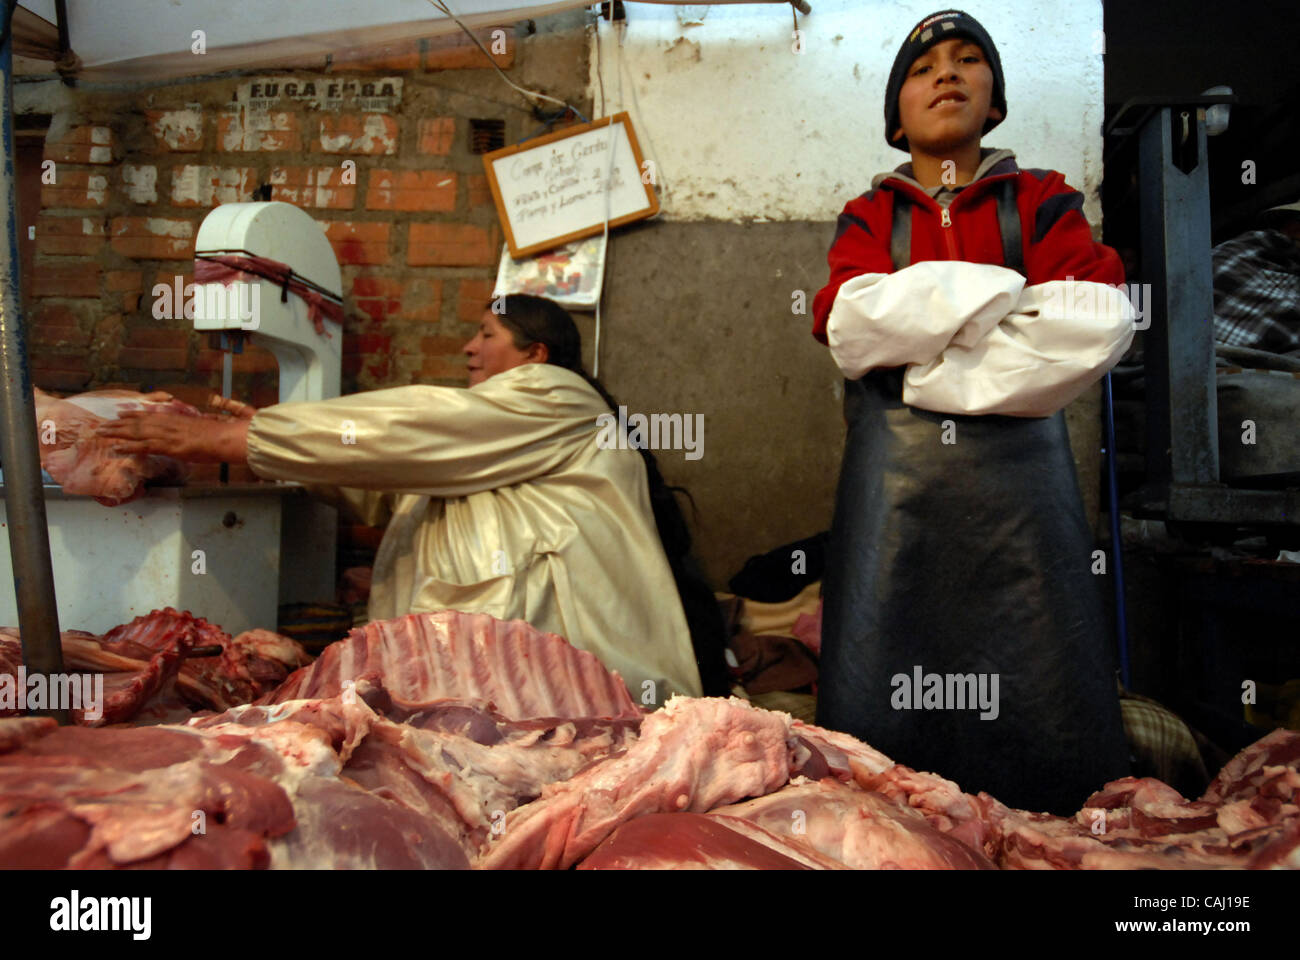 Dec 31, 2007 - La Paz, Bolivia - A young boy helps his grand mother to sell pork meat in La Paz Garita de Lima's street market. Every 31st December in La Paz, thousands of dead pigs are brought to the city to be sold, coming from Cochabamba, Santa Cruz and all La Paz areas. The bolivian tradition to Stock Photo